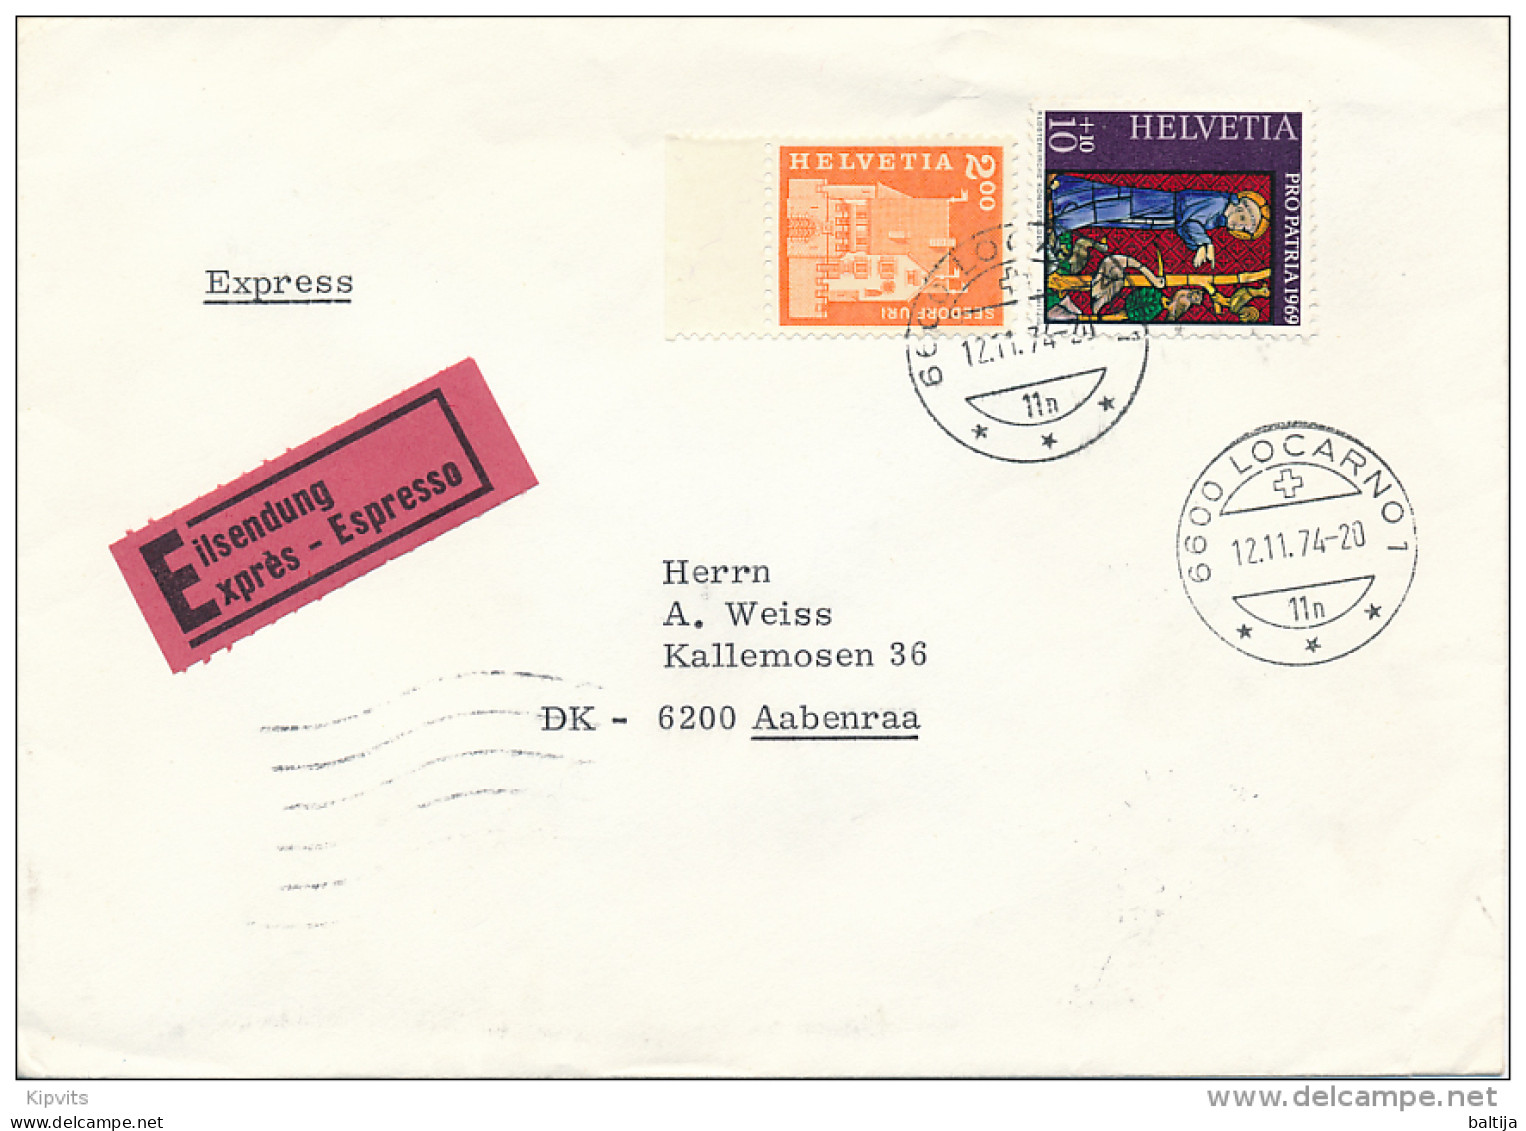 Express Eilsendung, Special Delivery Cover Abroad - 12 November 1974 Locarno 1 - Covers & Documents